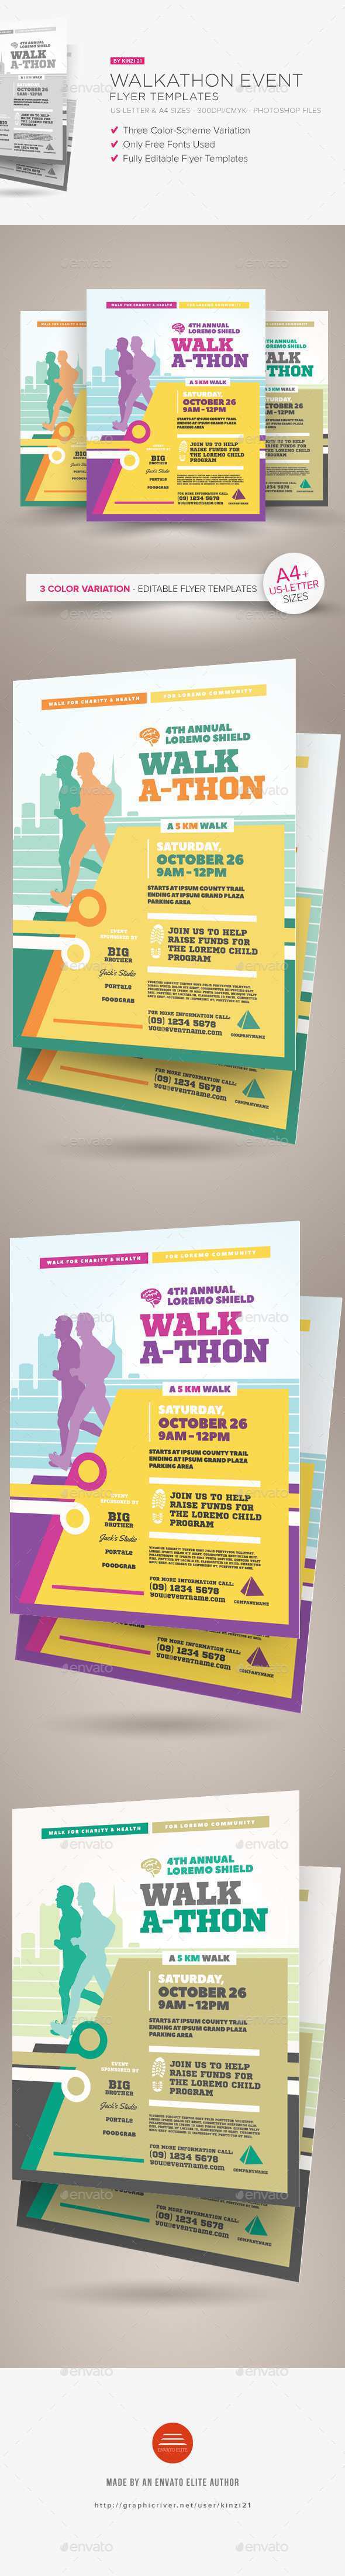 33 Visiting Walk A Thon Flyer Template Maker by Walk A Thon Flyer Template